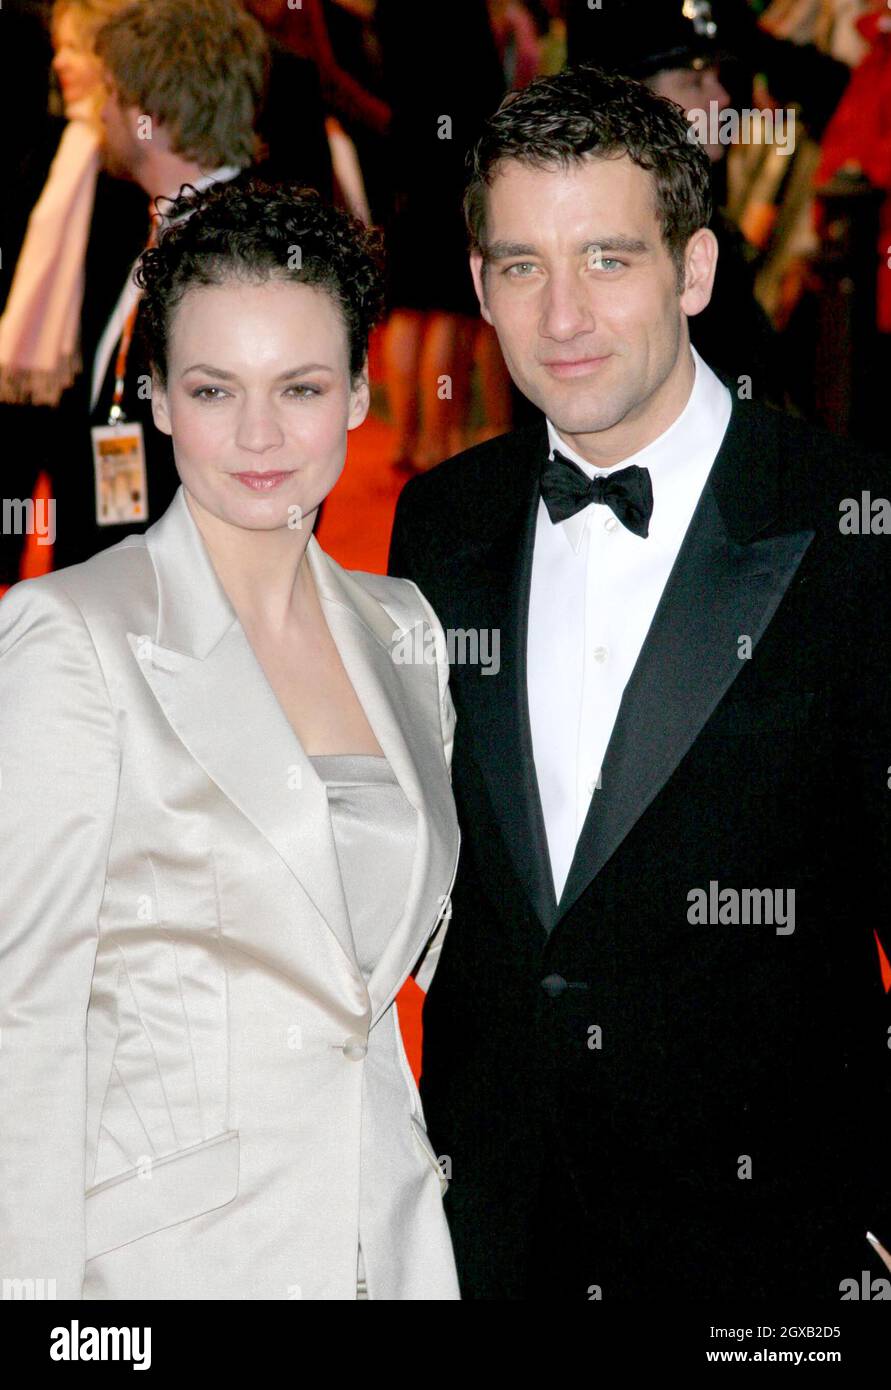 Clive Owen and wife pictured at the  arrivals for the BAFTAS -the British Academy Film Awards at Odeon Leicester Square. Stock Photo